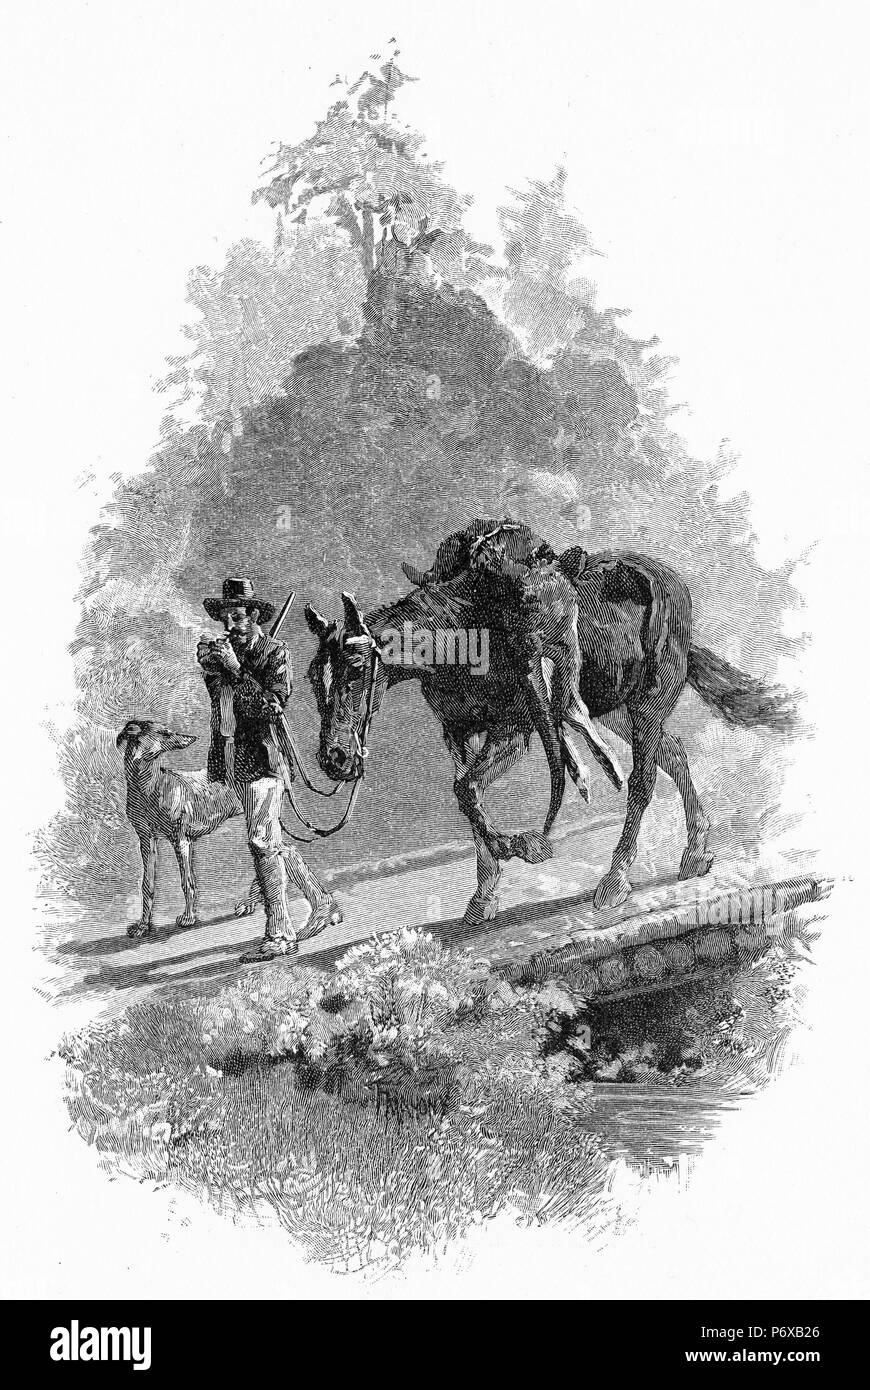 Engraving of a kangaroo hunter carrying home the carcass of a kangaroo, Australia. From the Picturesque Atlas of Australasia Vol 3, 1886 Stock Photo